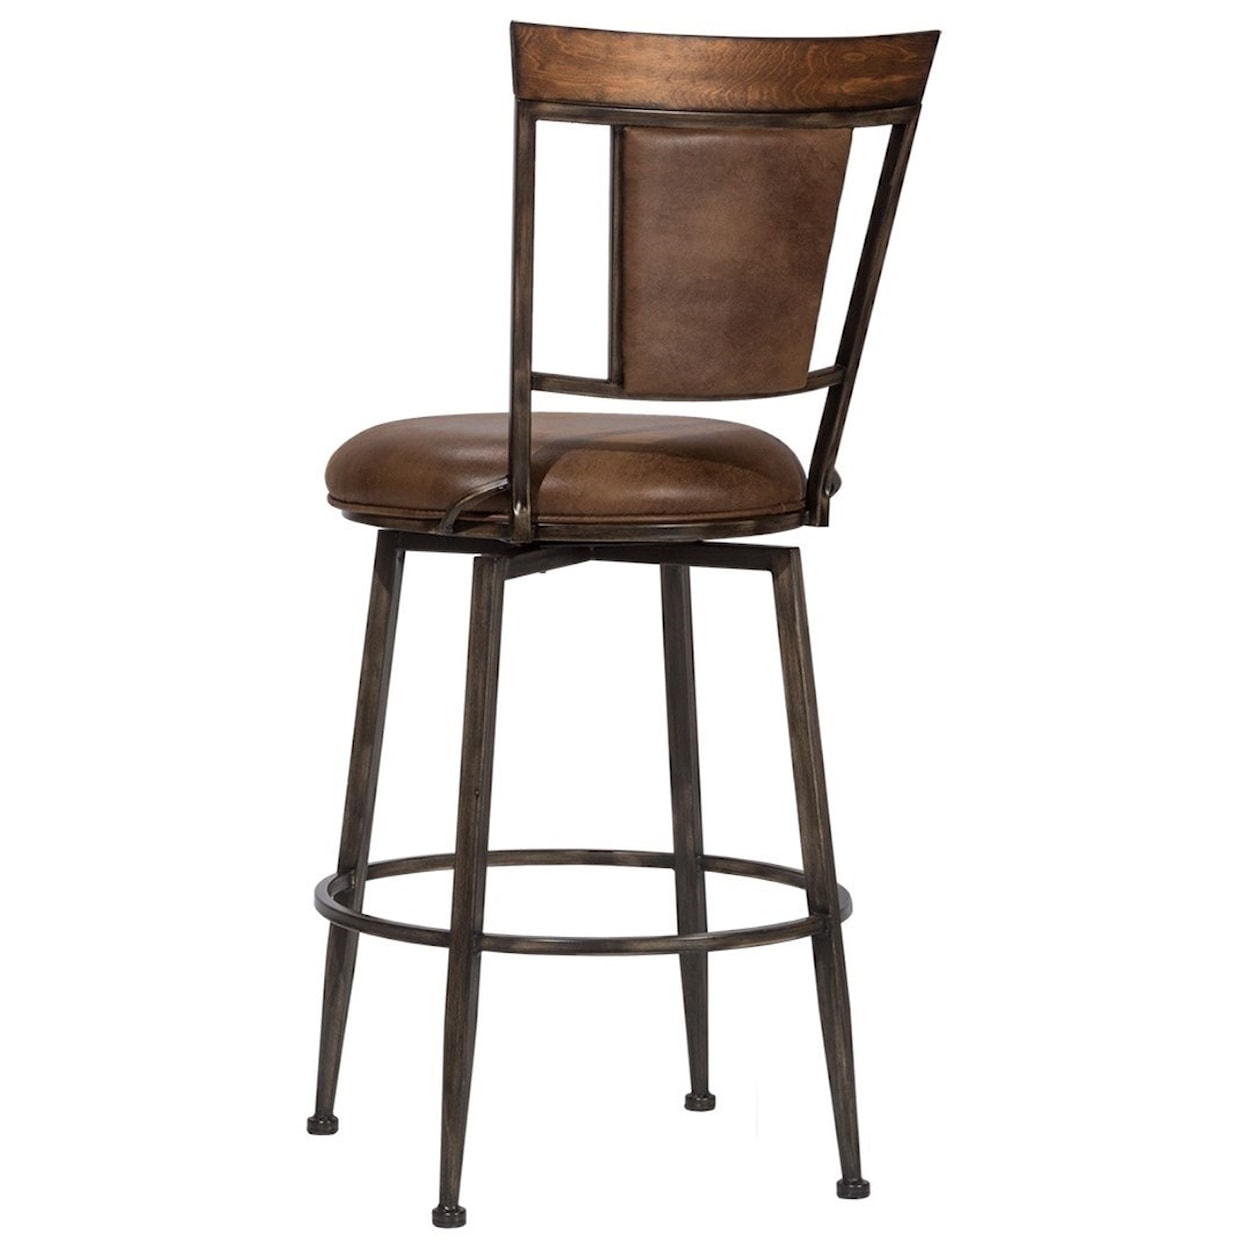 Hillsdale Danforth Commercial Grade Stools Commercial Grade Swivel Counter Stool